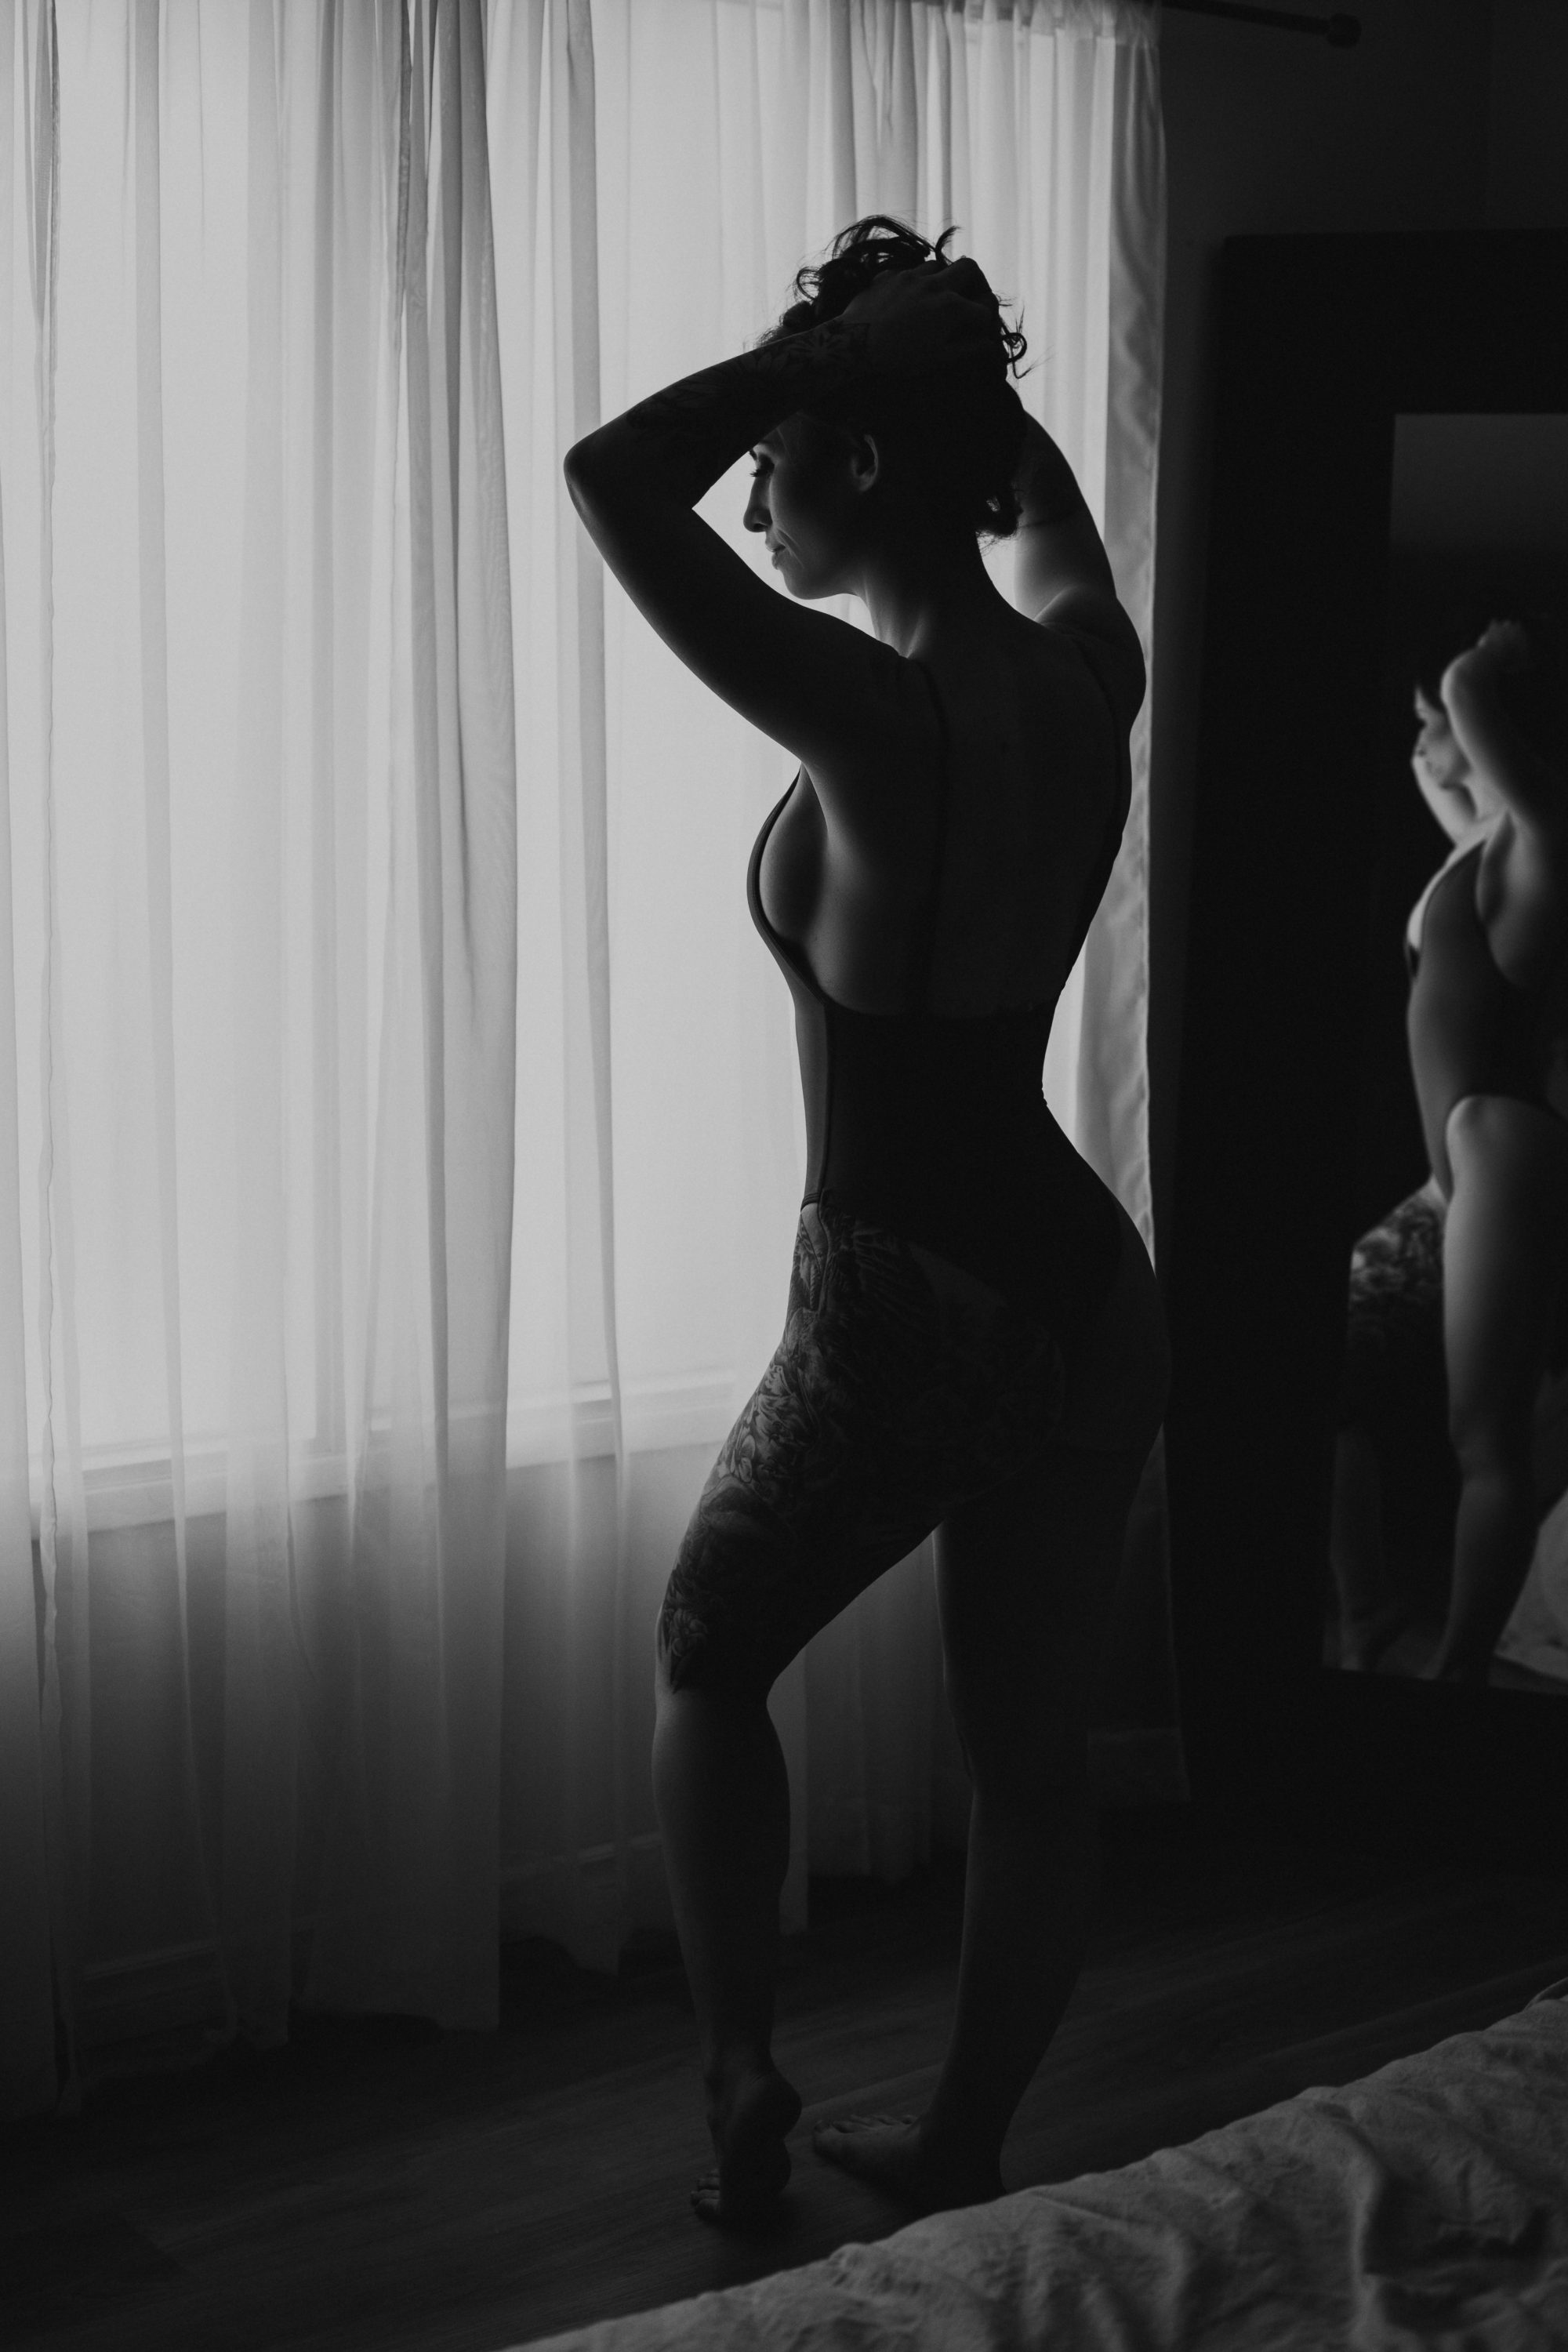 How to set the mood for your at-home boudoir photoshoot